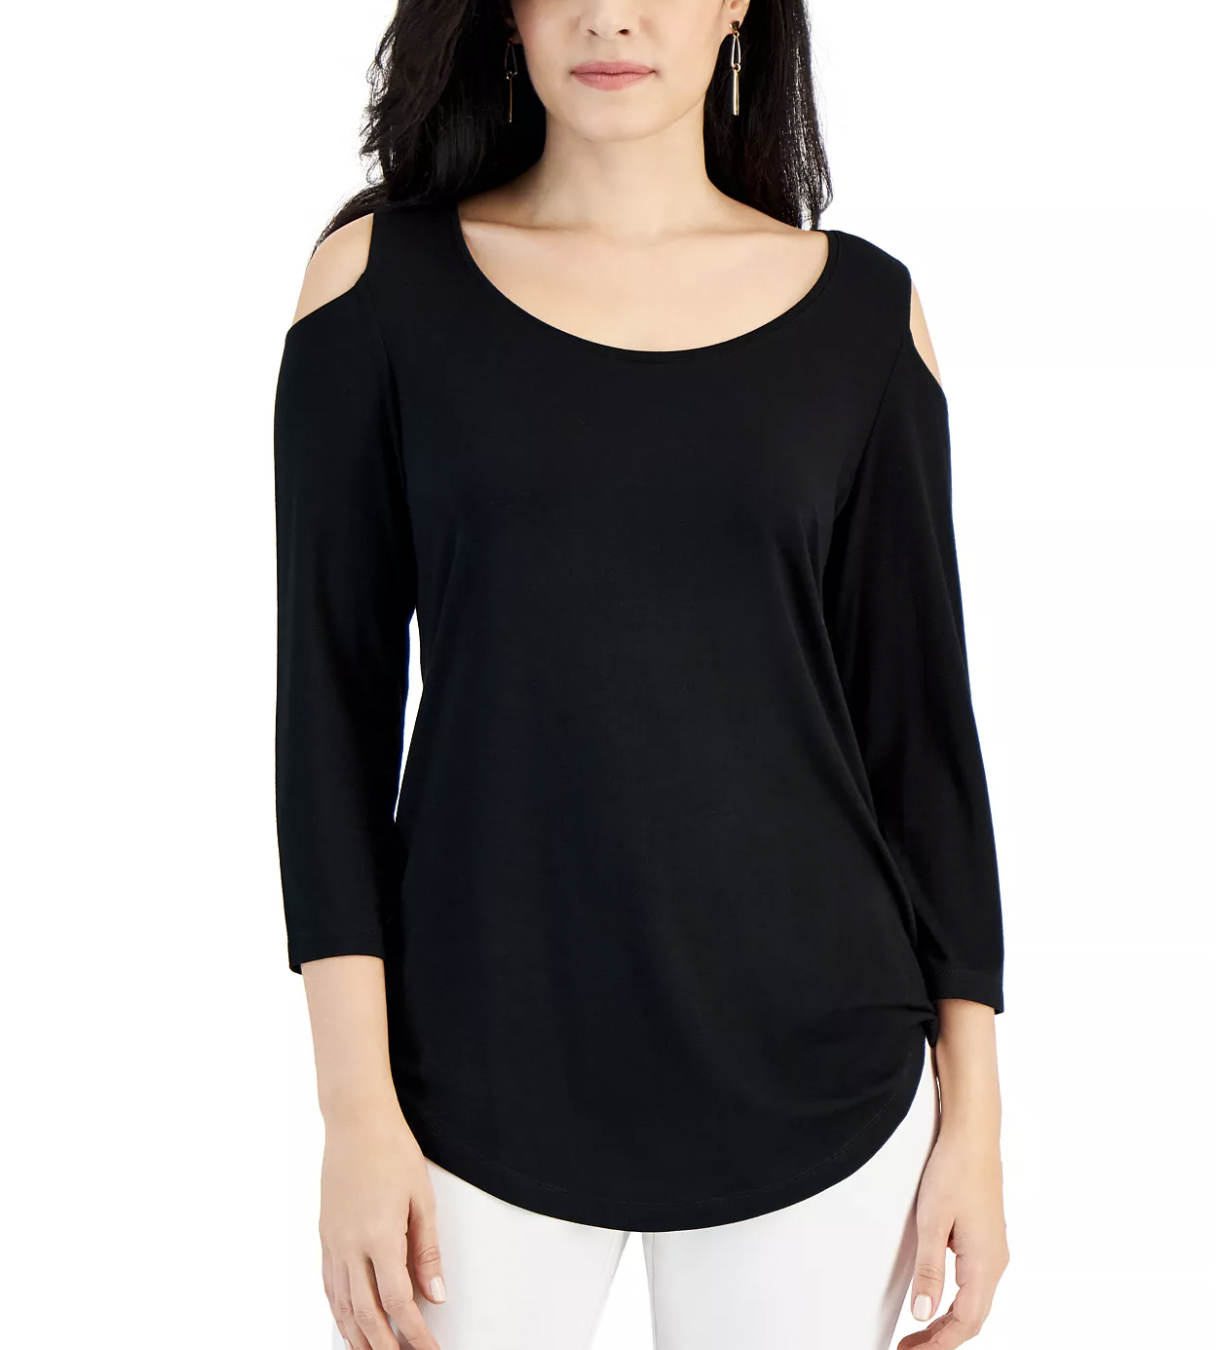 JM COLLECTION Solid-Color Cold-Shoulder Top, Created for Macy's